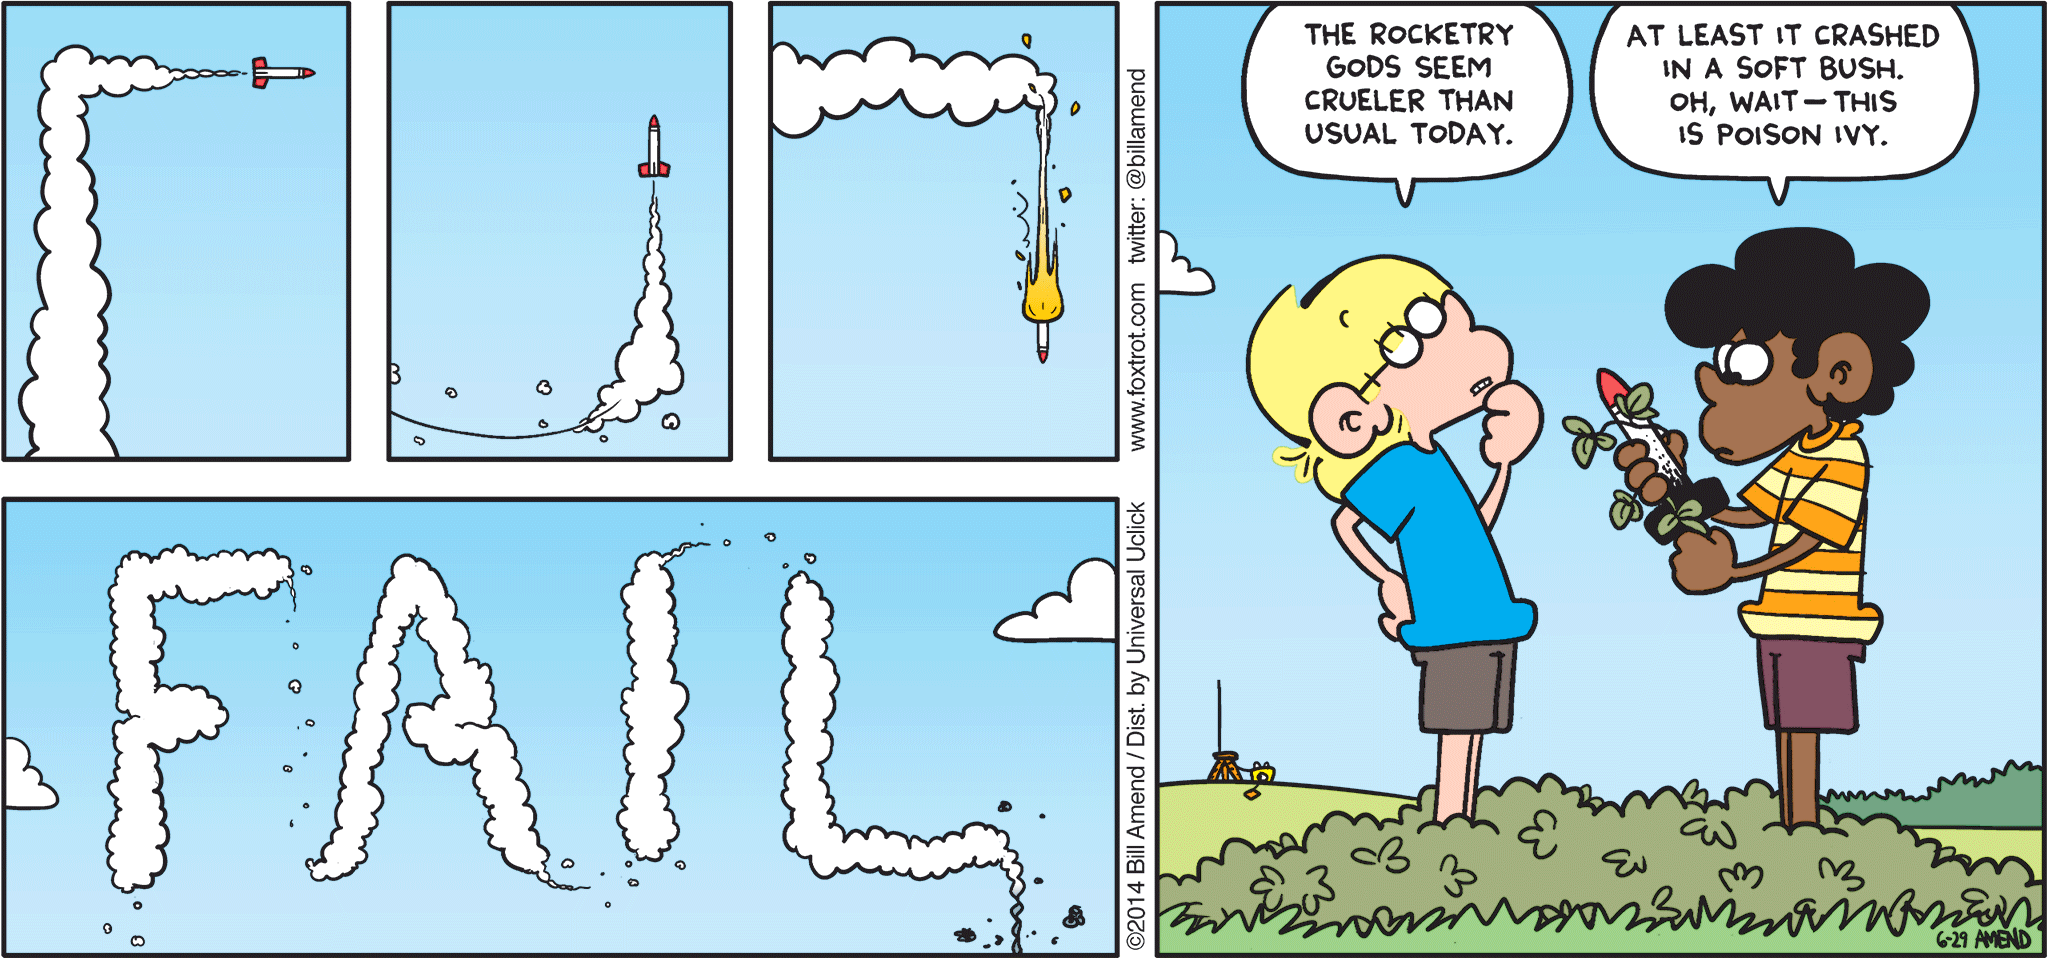 FoxTrot by Bill Amend - "Skywrithing" published June 29, 2014 - Jason: The rocketry gods seem crueler than usual today. Marcus: At least it crashed in a soft bush, oh, wait - this is poison ivy.